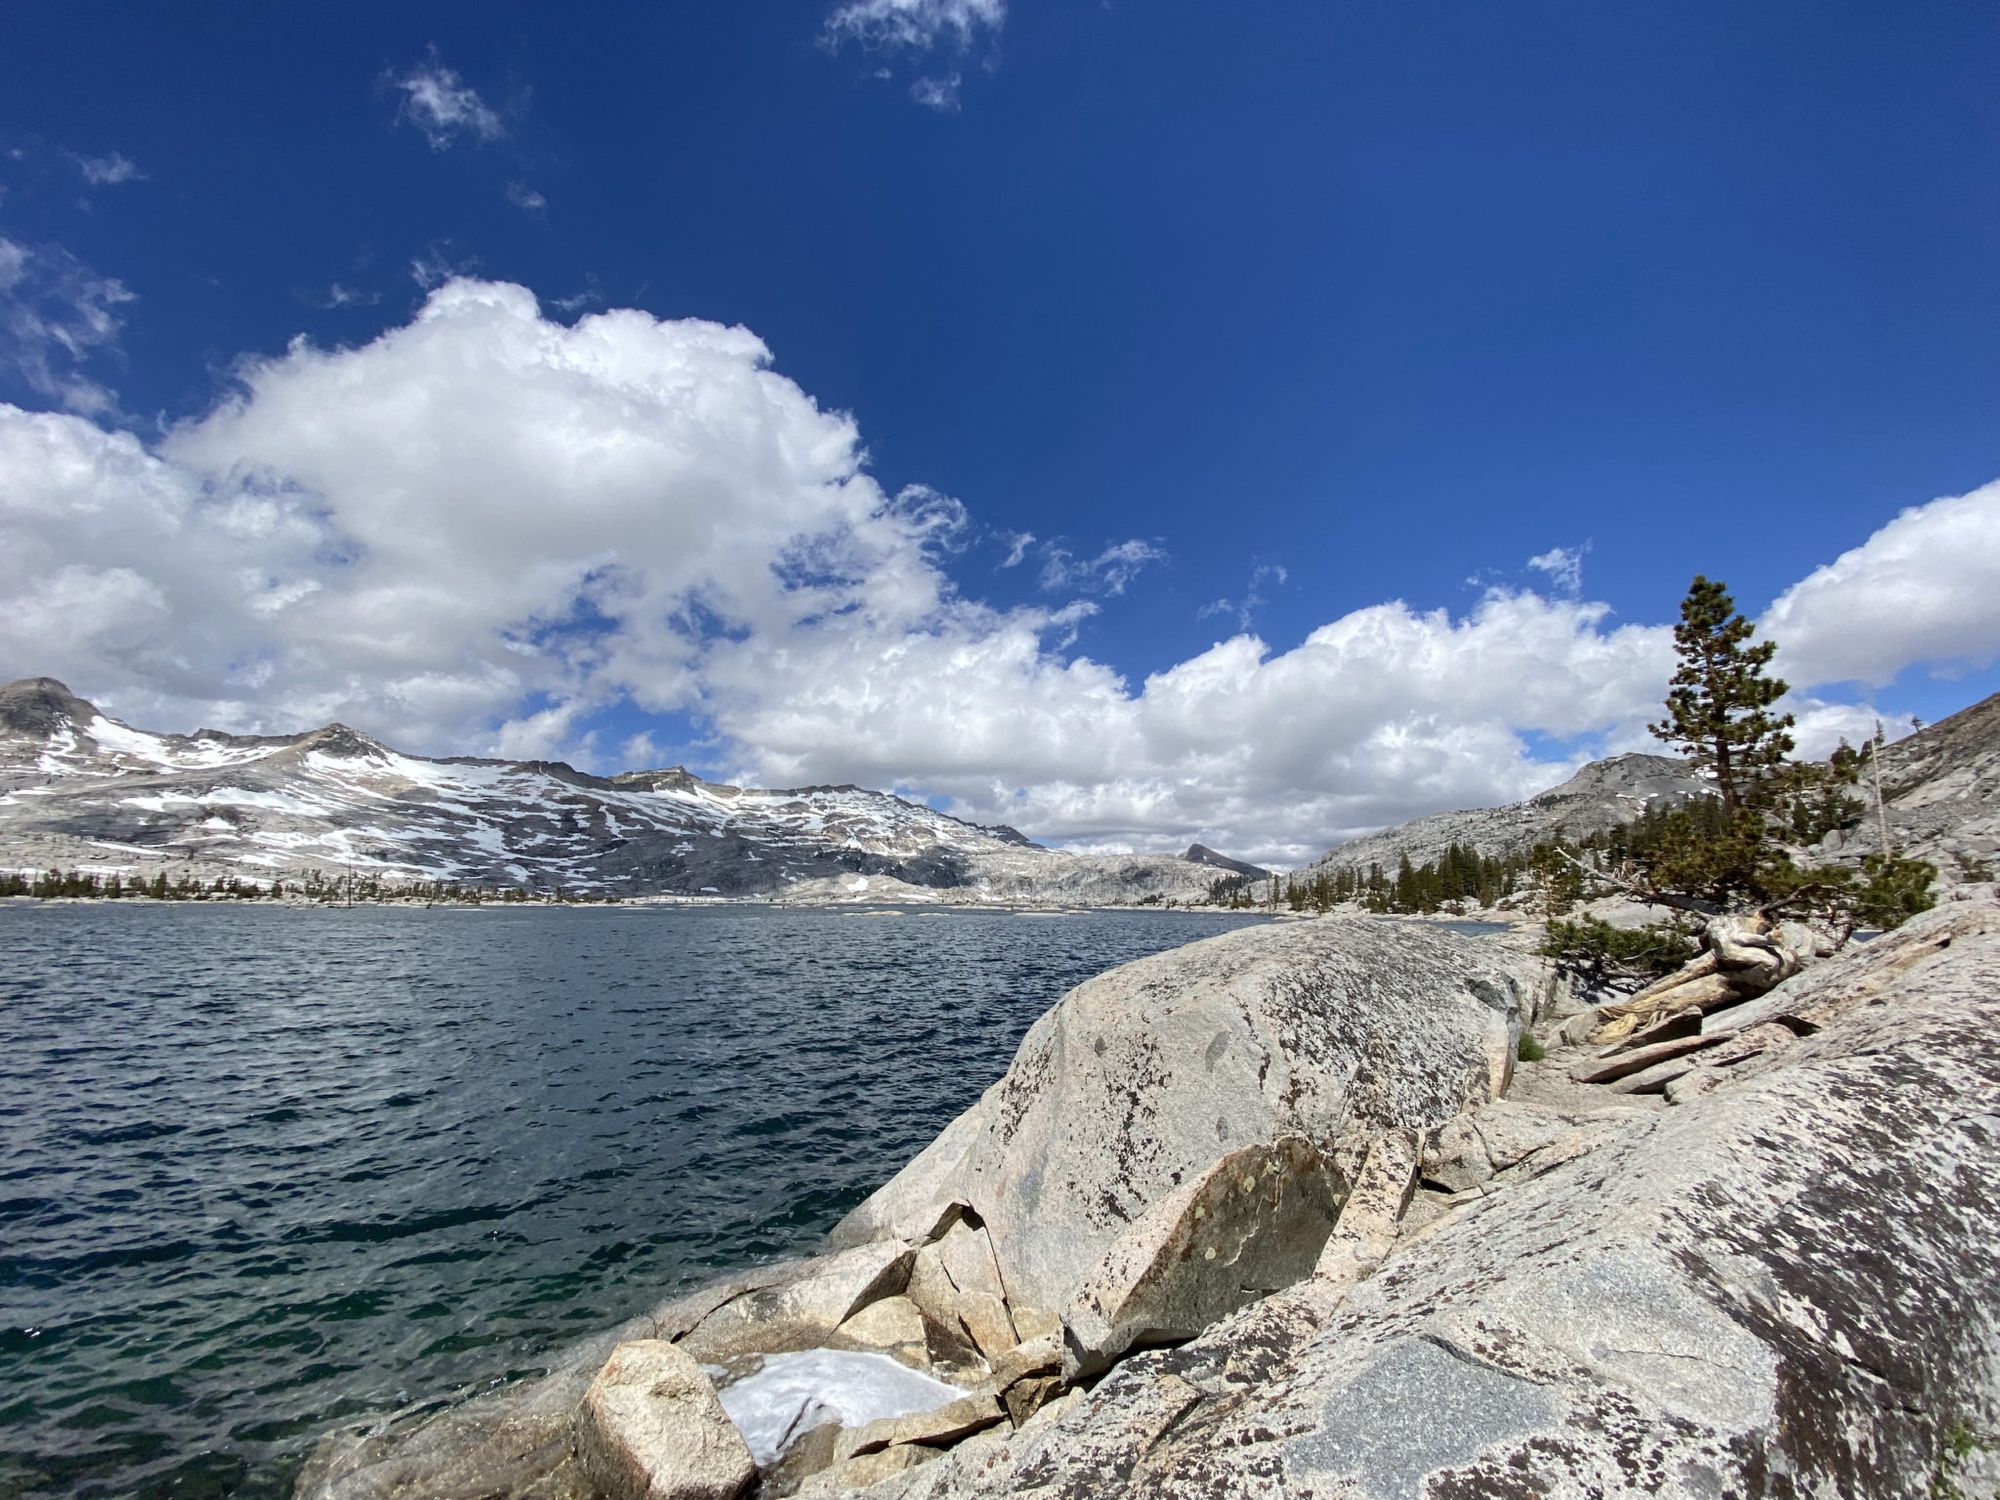 A lake with a snowy mountain range on the far side and white granite cliffs on the near shore.